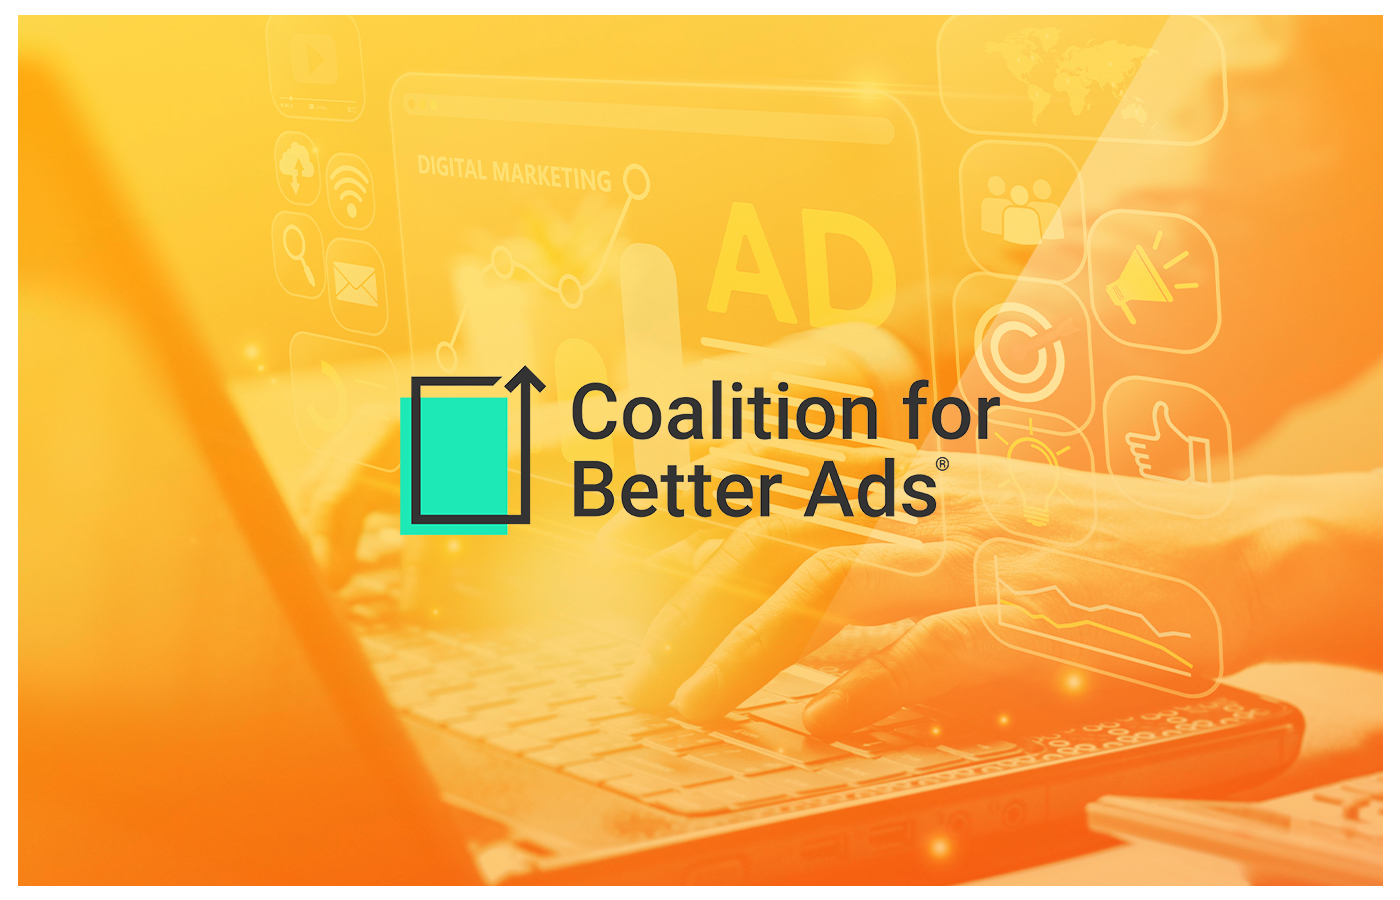 We’re in the Coalition for Better Ads!